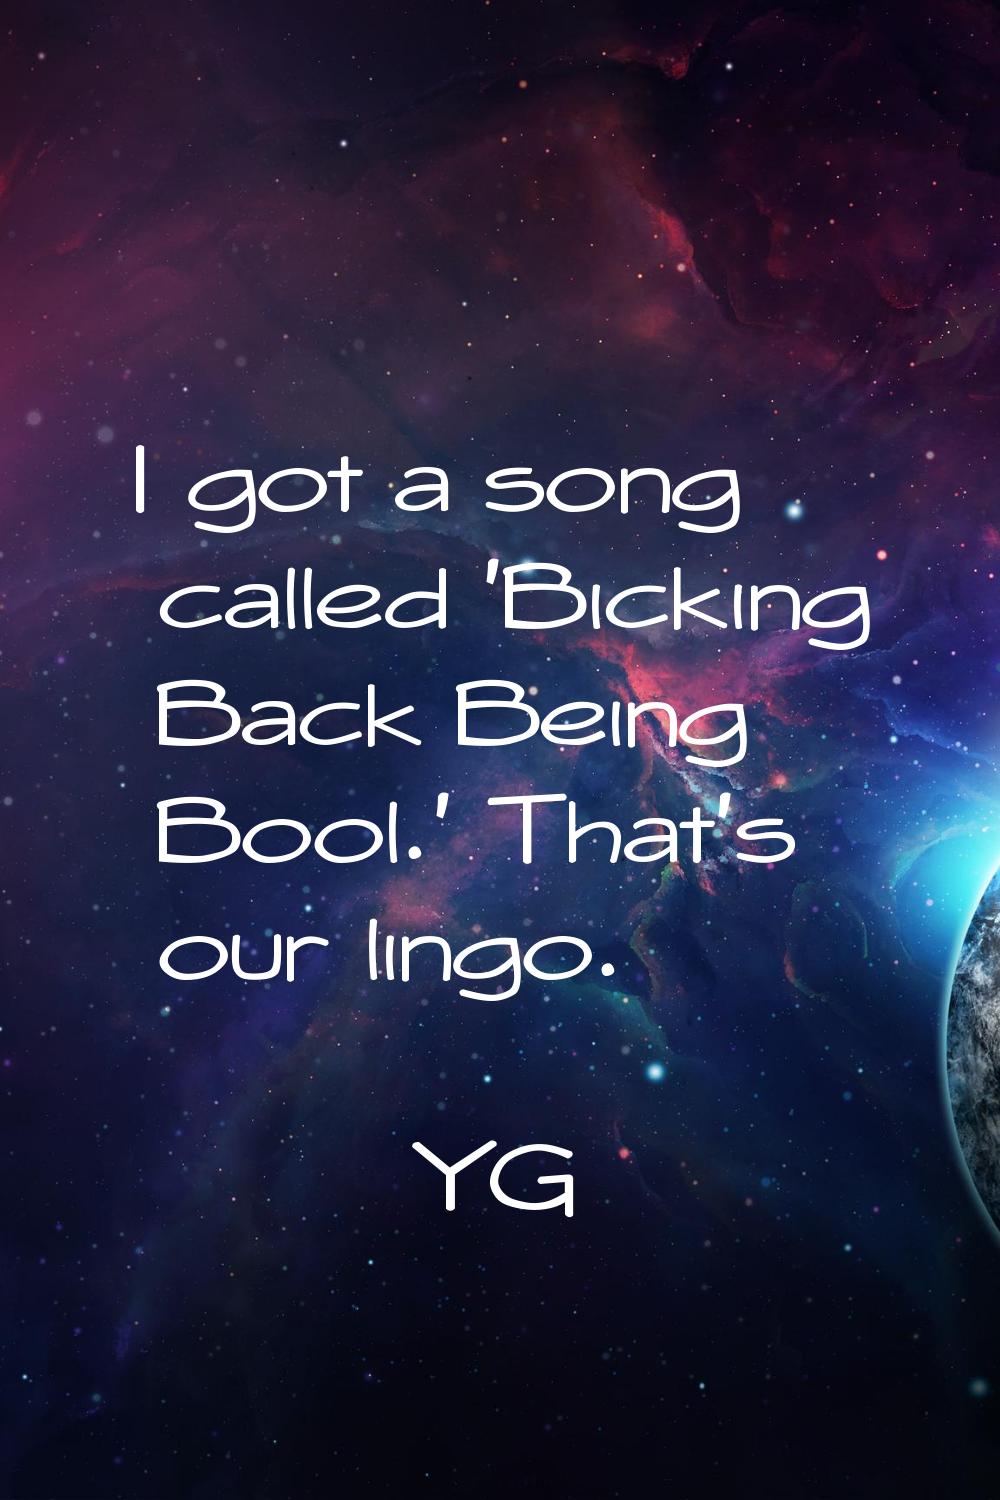 I got a song called 'Bicking Back Being Bool.' That's our lingo.